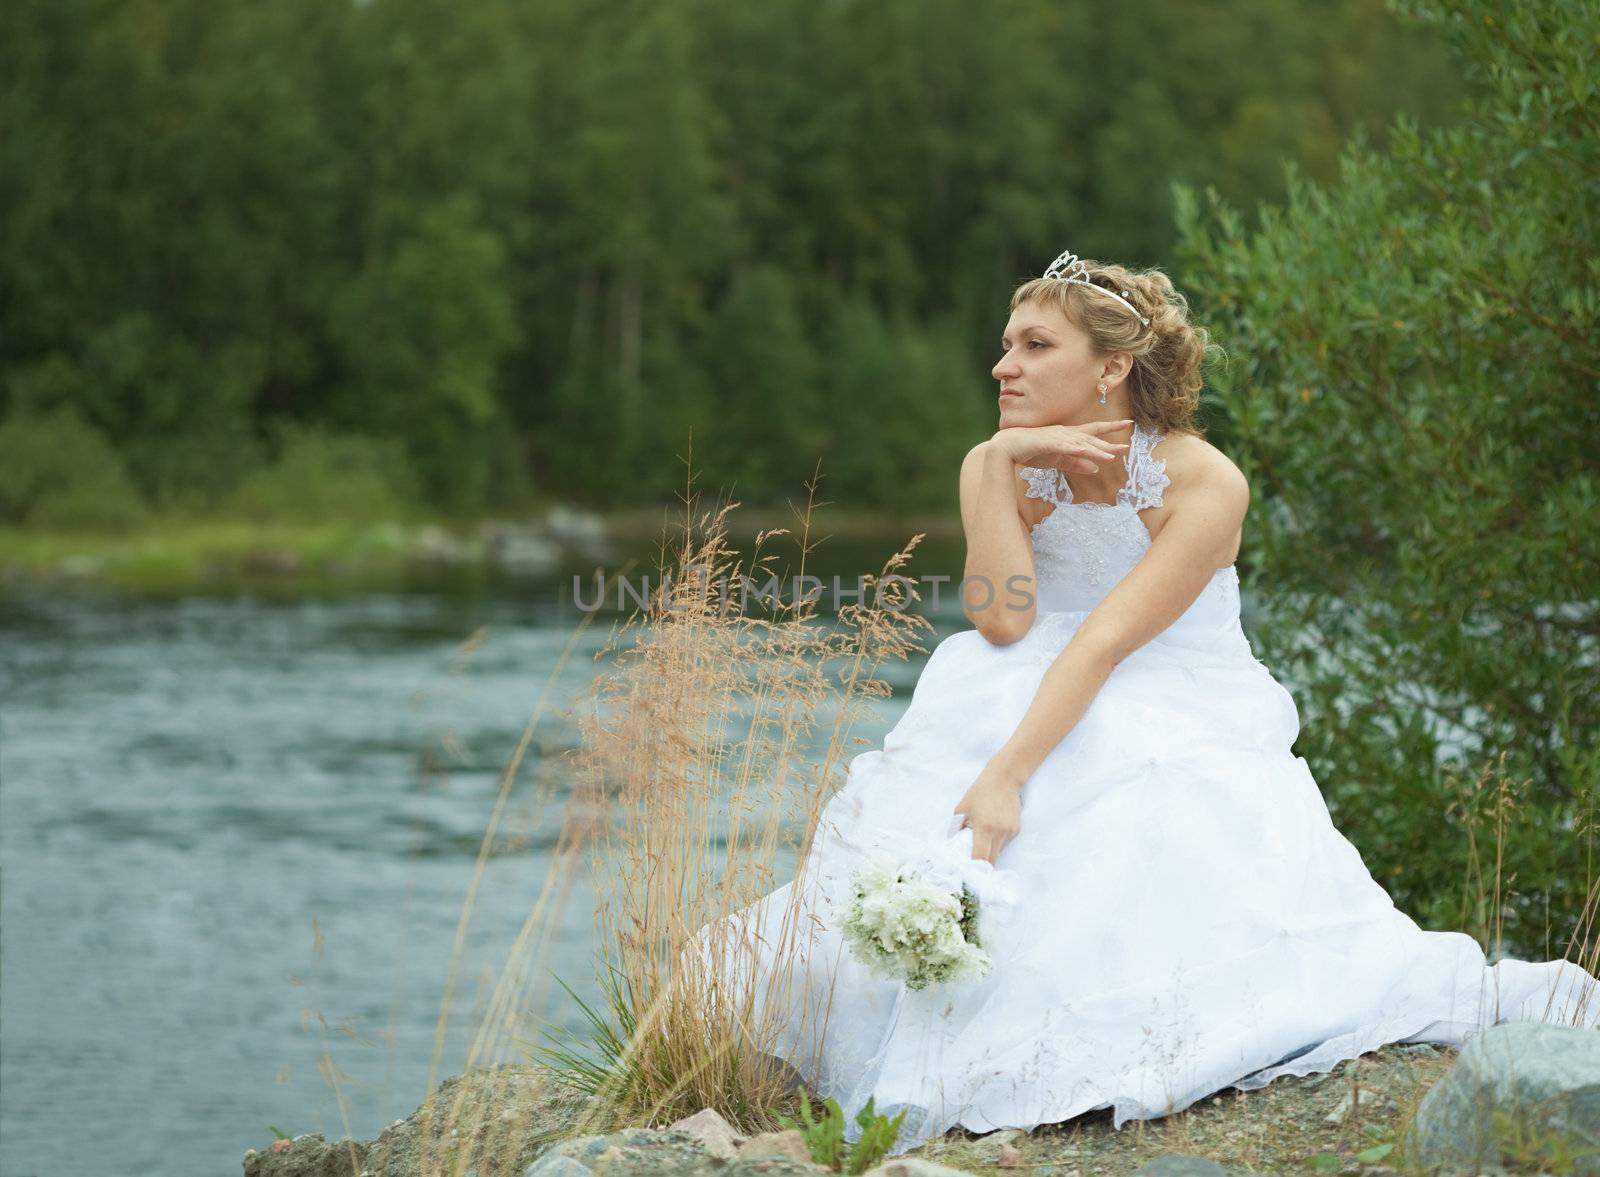 The sad bride sits on river bank and looks afar